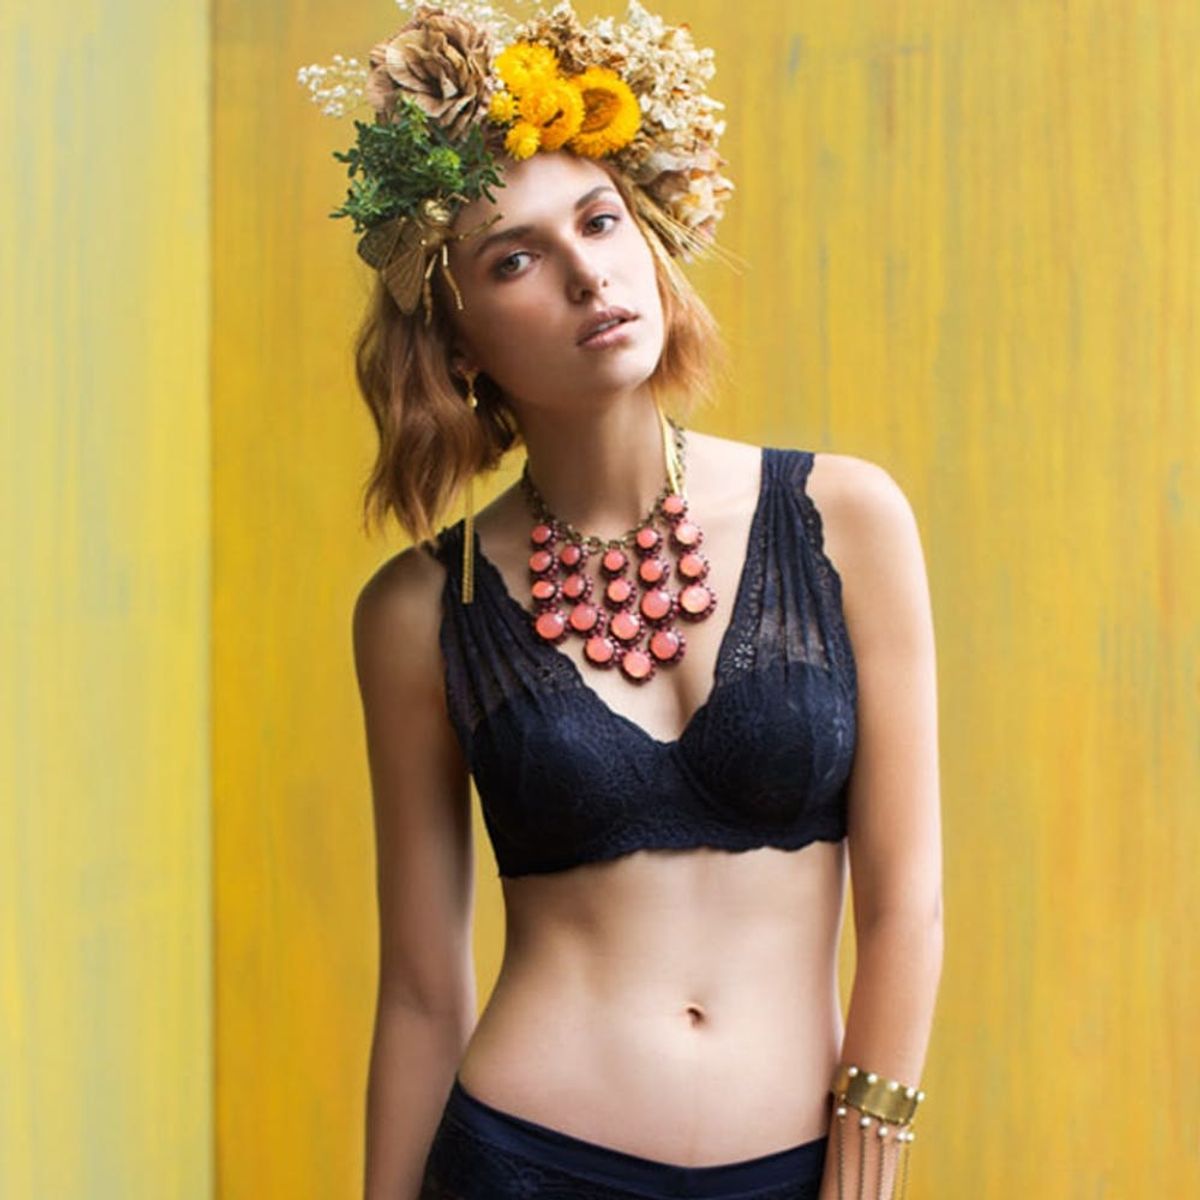 How This Lingerie Brand Is Empowering Women